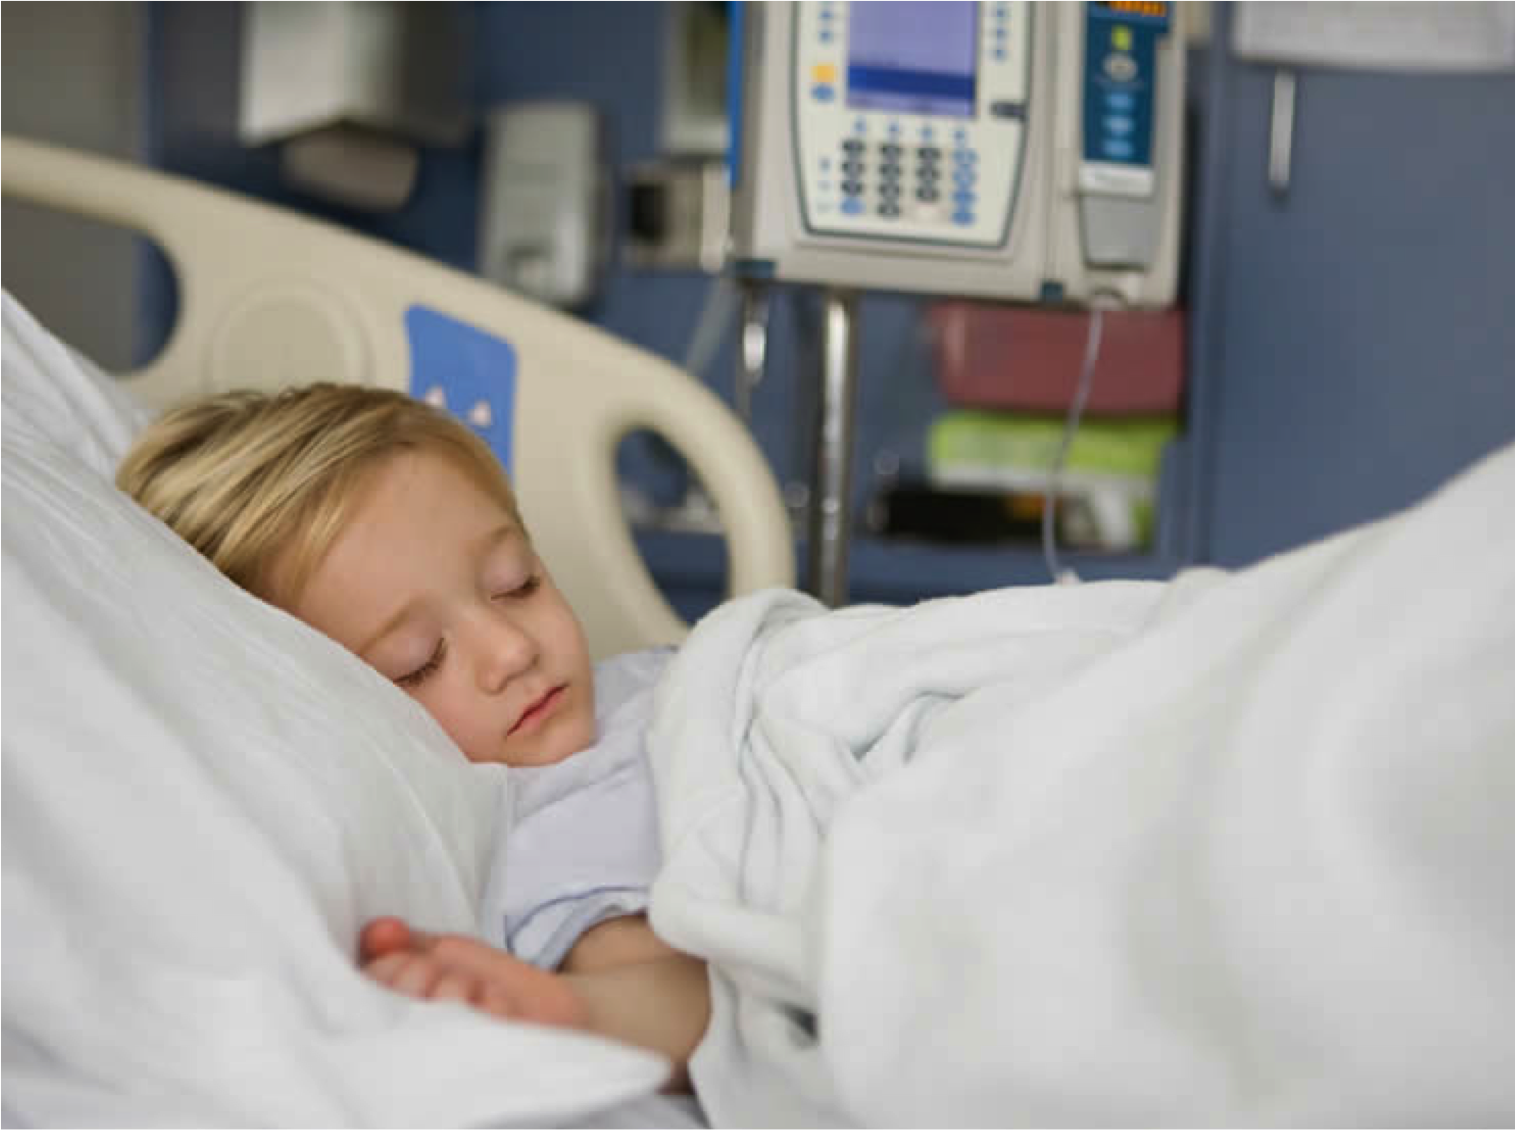 Surprise: Your child may not need surgery to remove an appendix